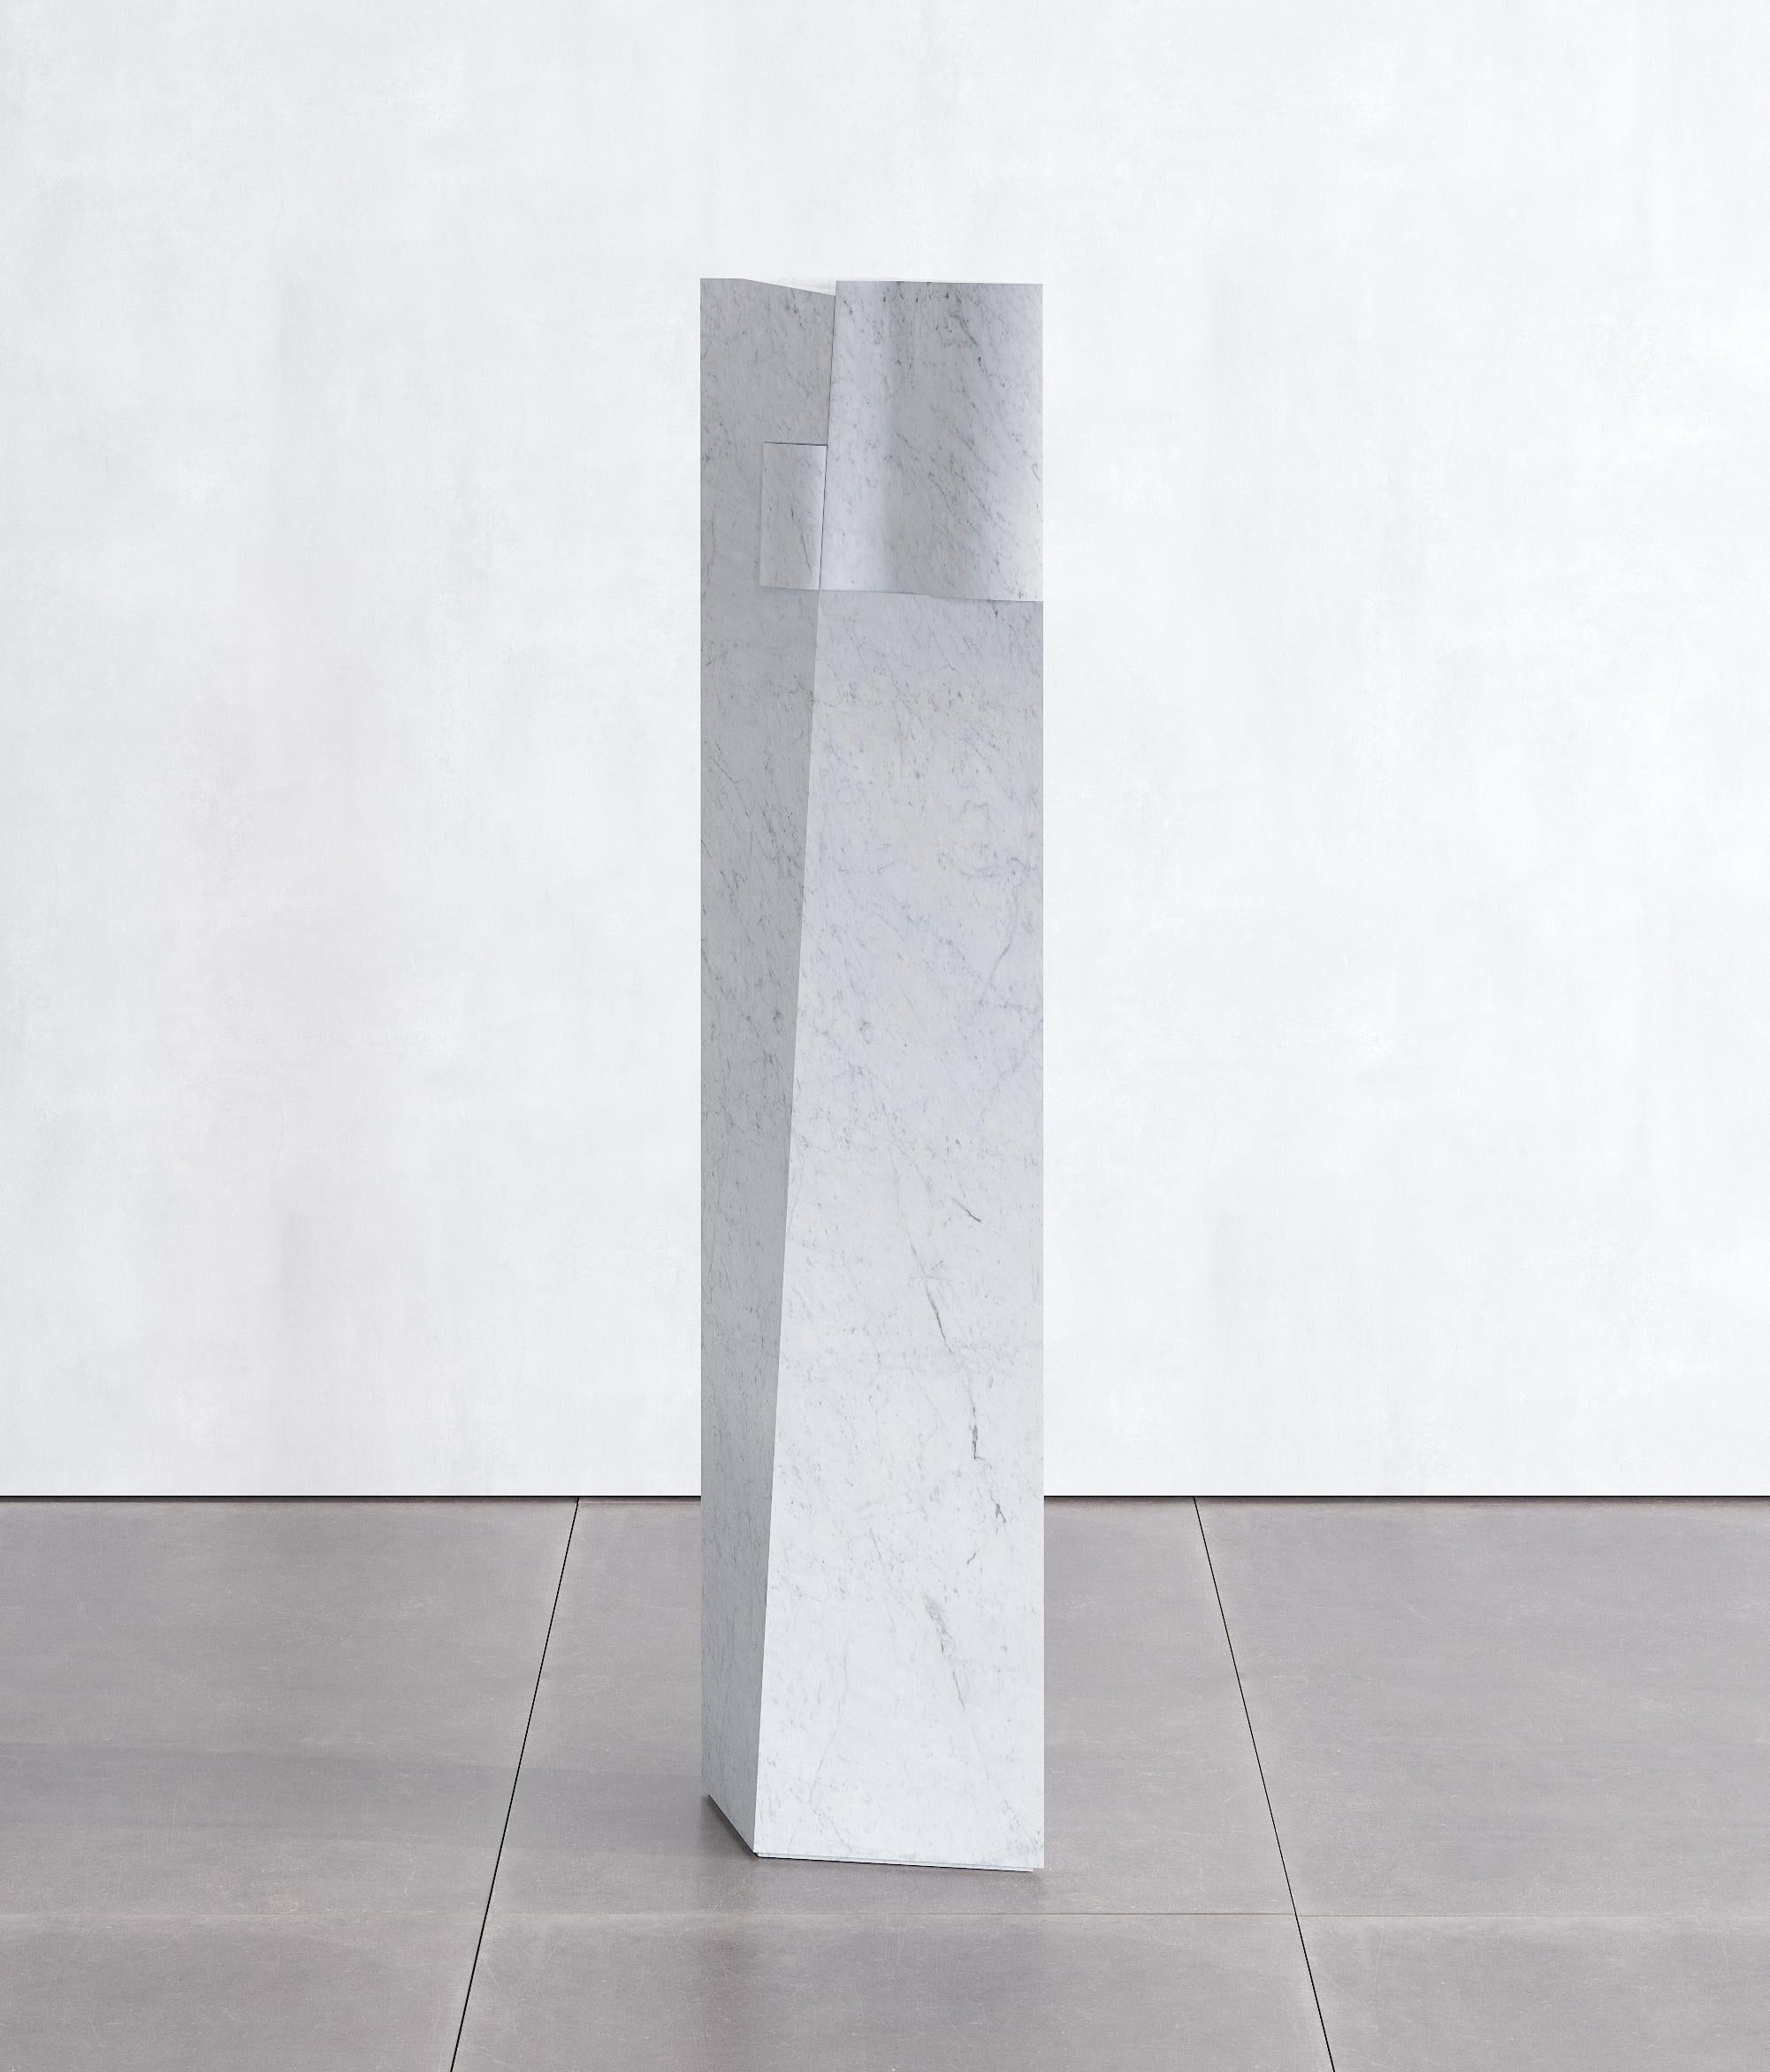 Item 3 A thrust sculpture by Scattered Disc Objects 
Limited Edition 8+4 AP.
Dimensions: D 37 x W 23 x H 133 cm 
Material: Bardiglio Marble.
Technique: hand carved marble, with sliding parts revealing small containers. Hand brushed.
Available